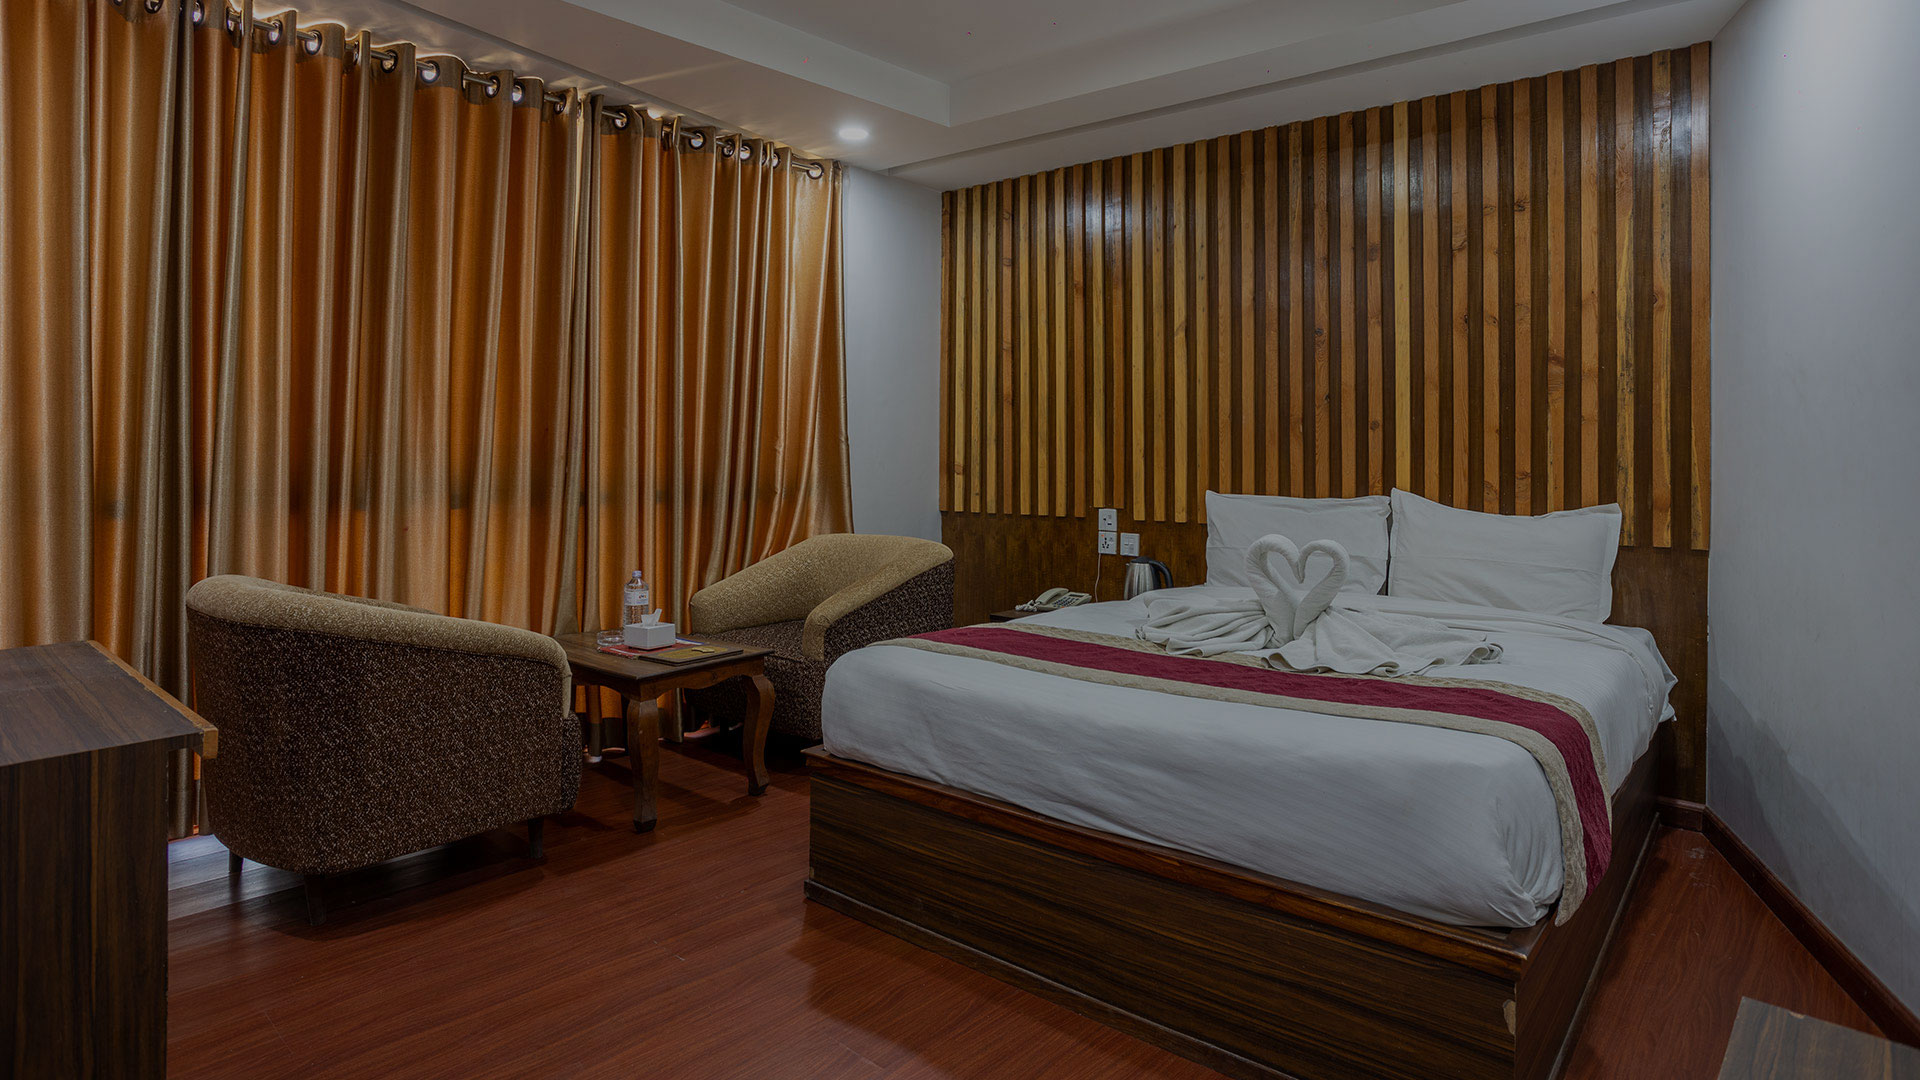 Elegantly Designed for Comfortable and Accessible stay